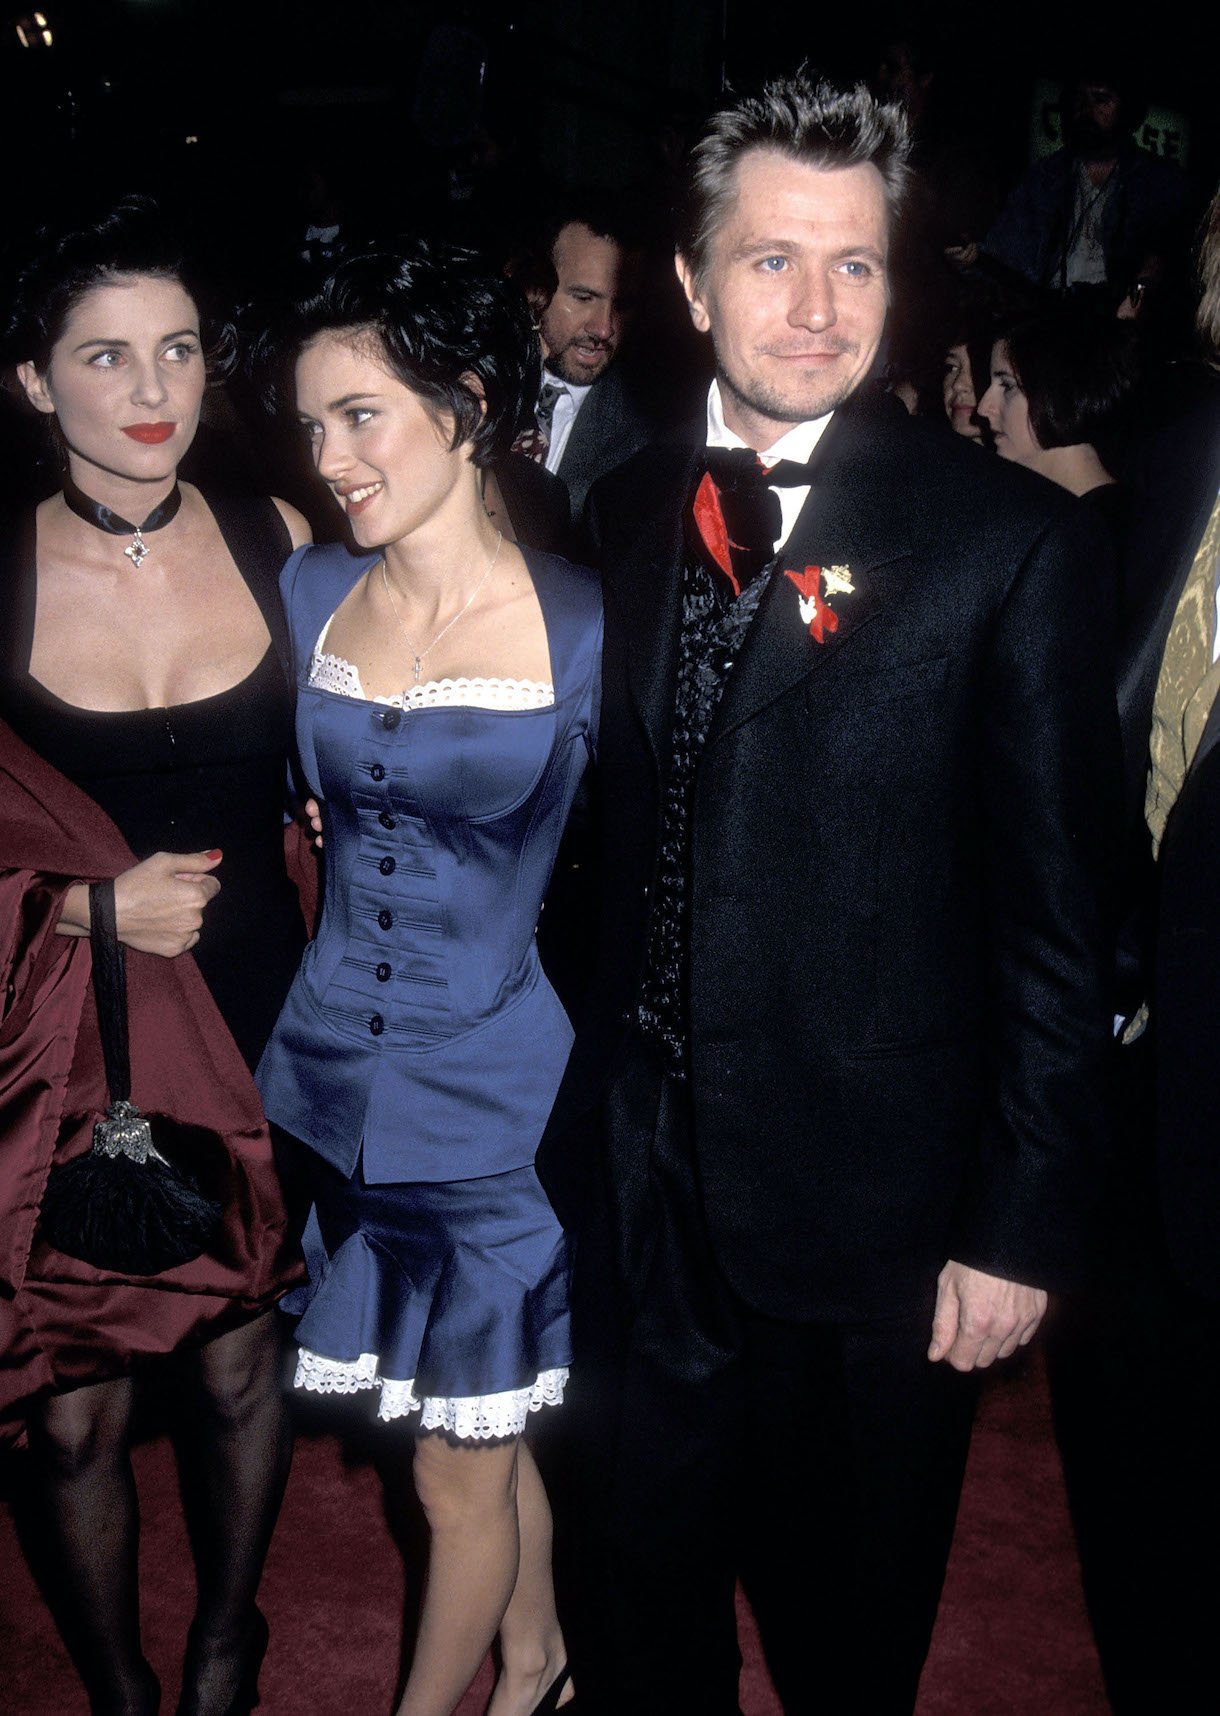 Sadie Frost, Winona Ryder and actor Gary Oldman attend the "Dracula" Hollywood Premiere in 1992